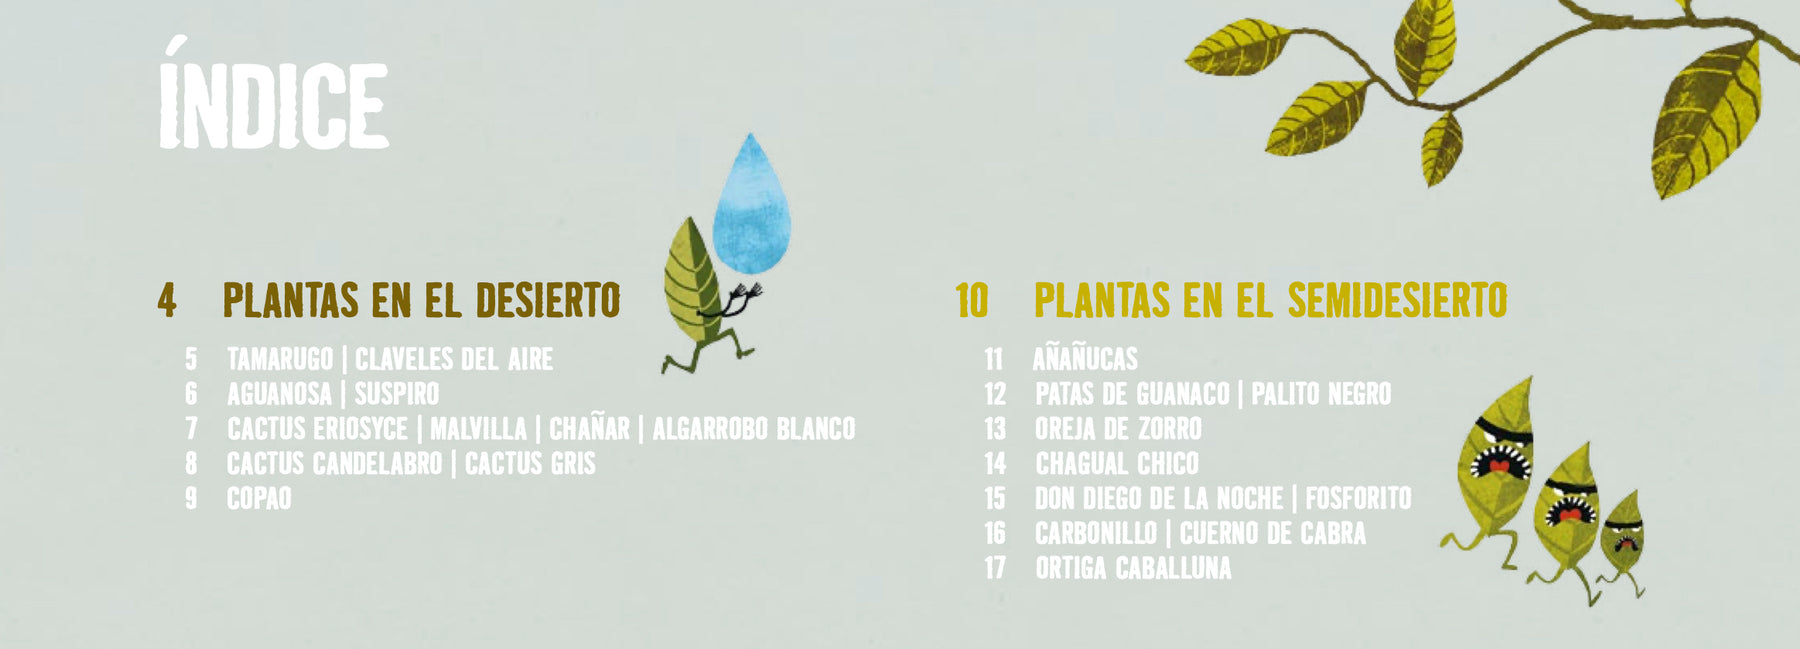 Index from the picture book Huerta, cosecha lo que siembras by Monica Martin y la chacra